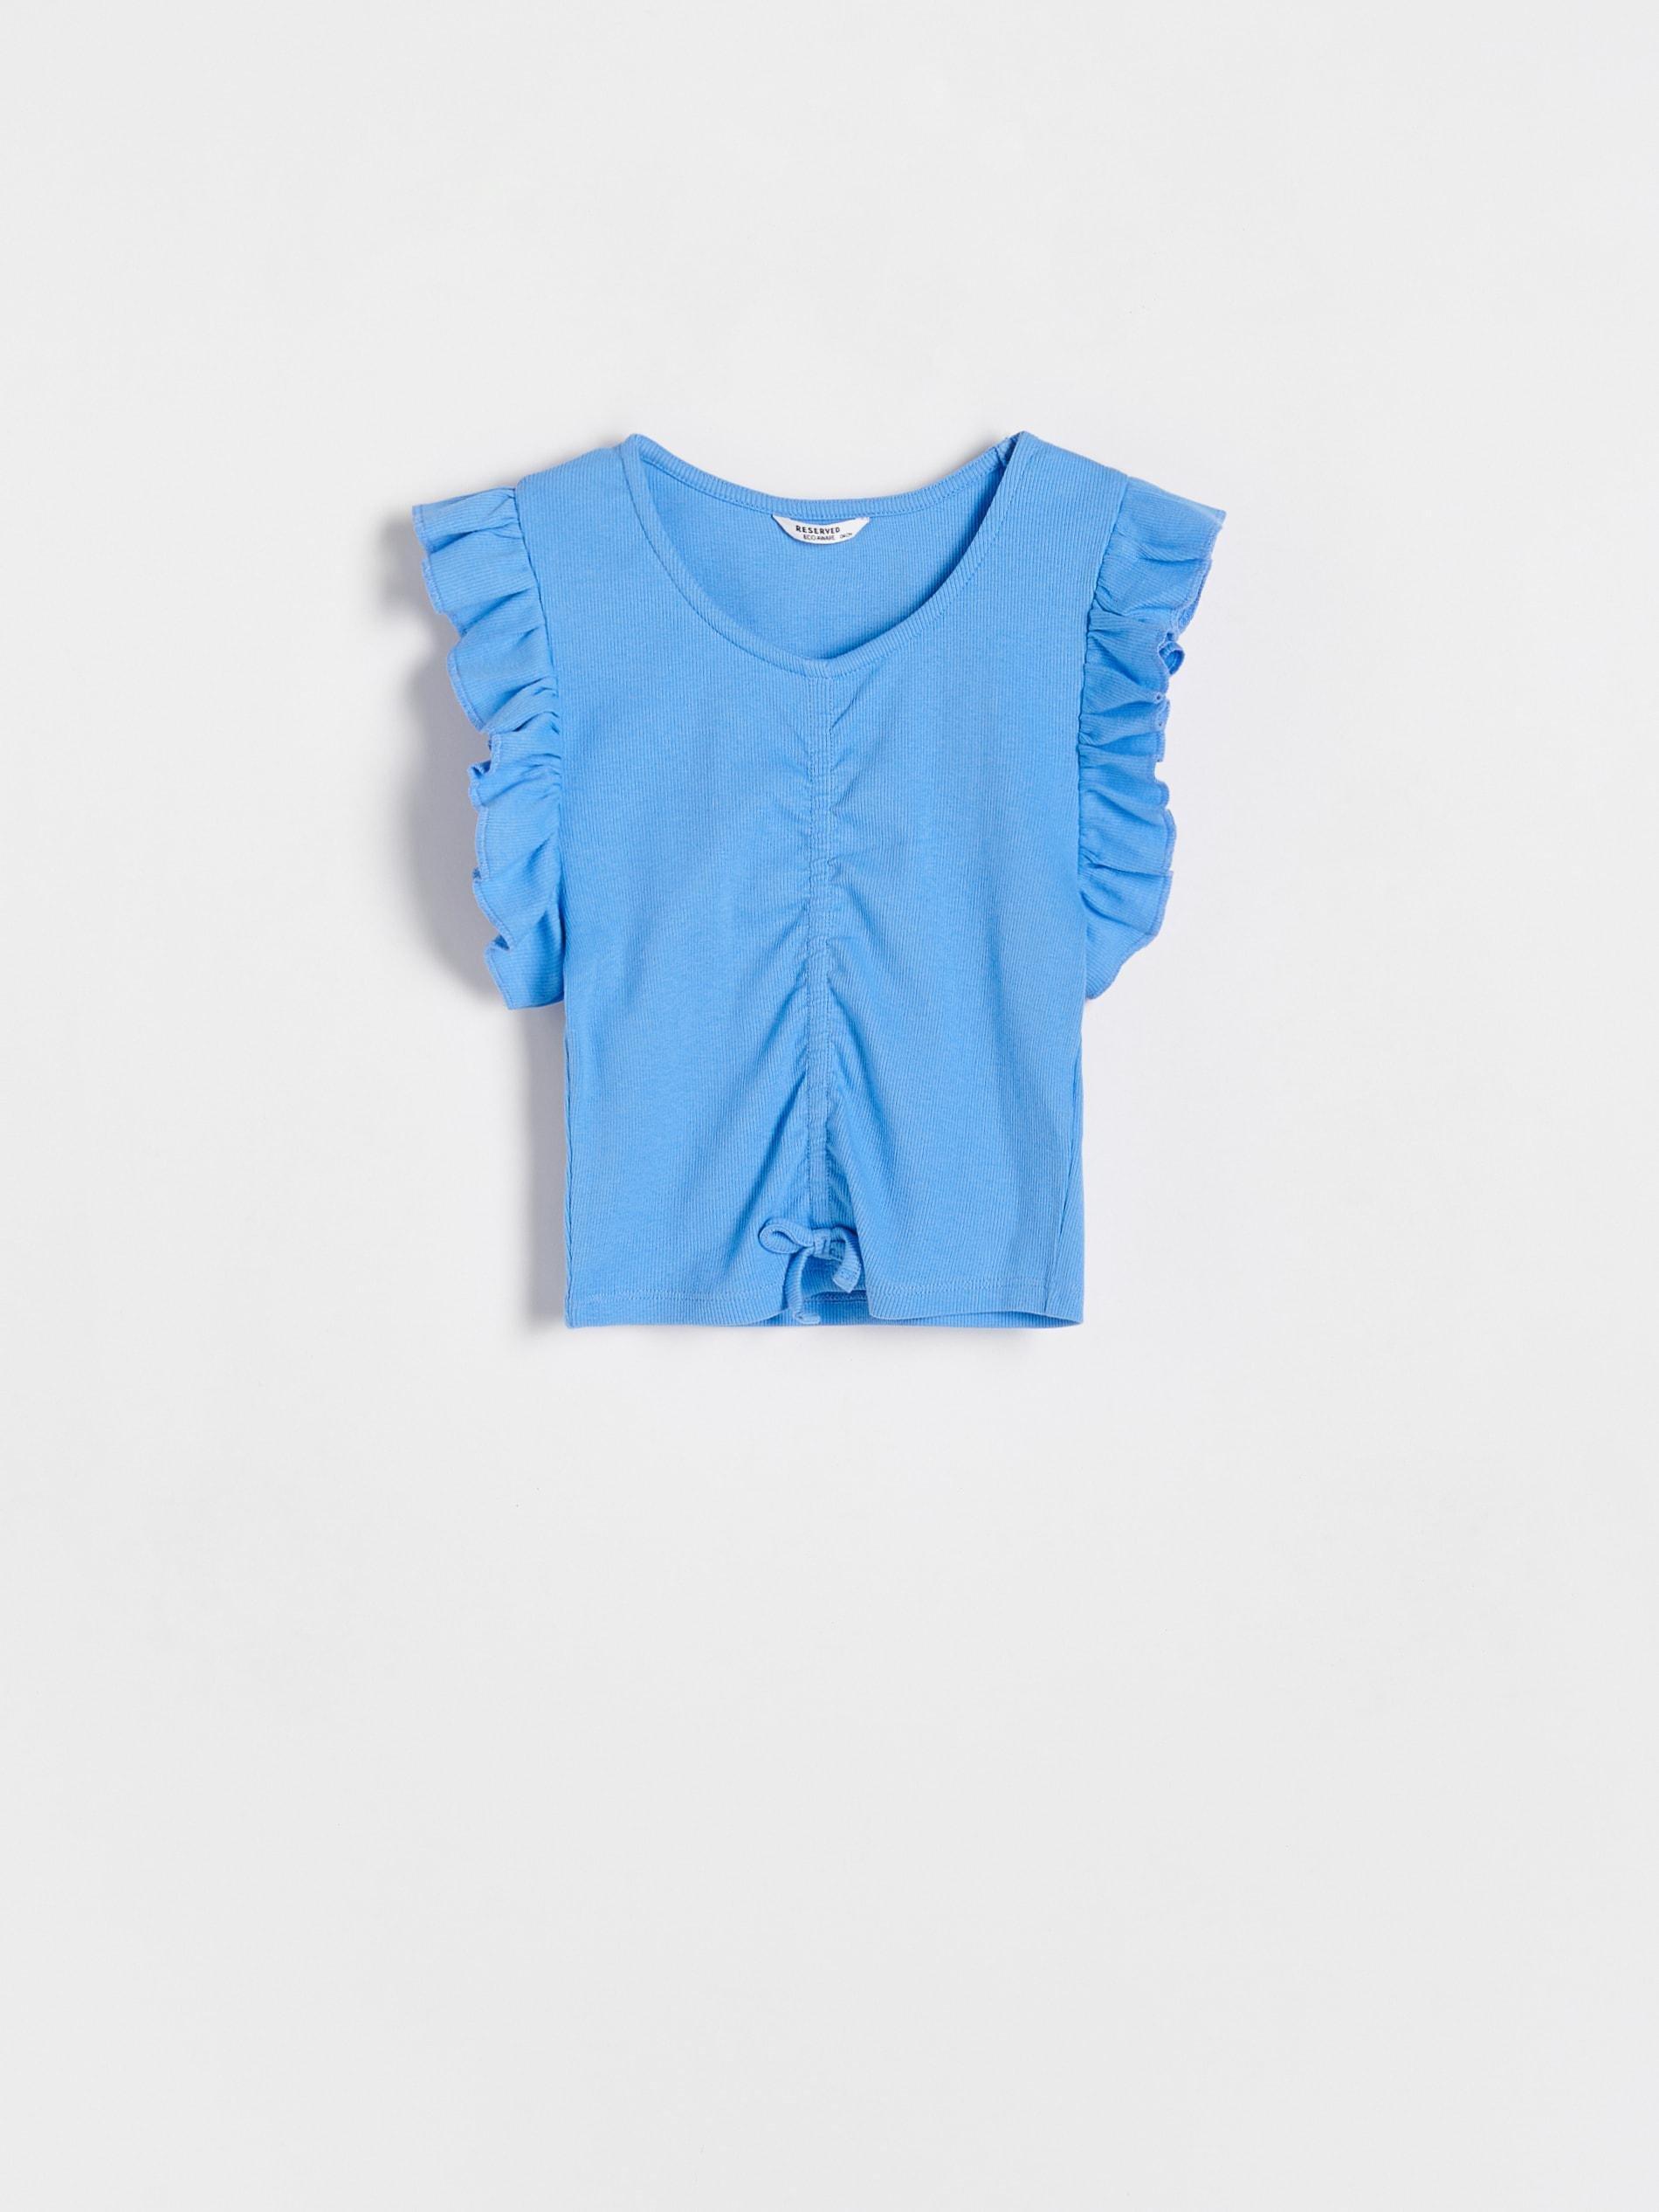 Reserved - Blue Gathered Blouse, Kids Girls